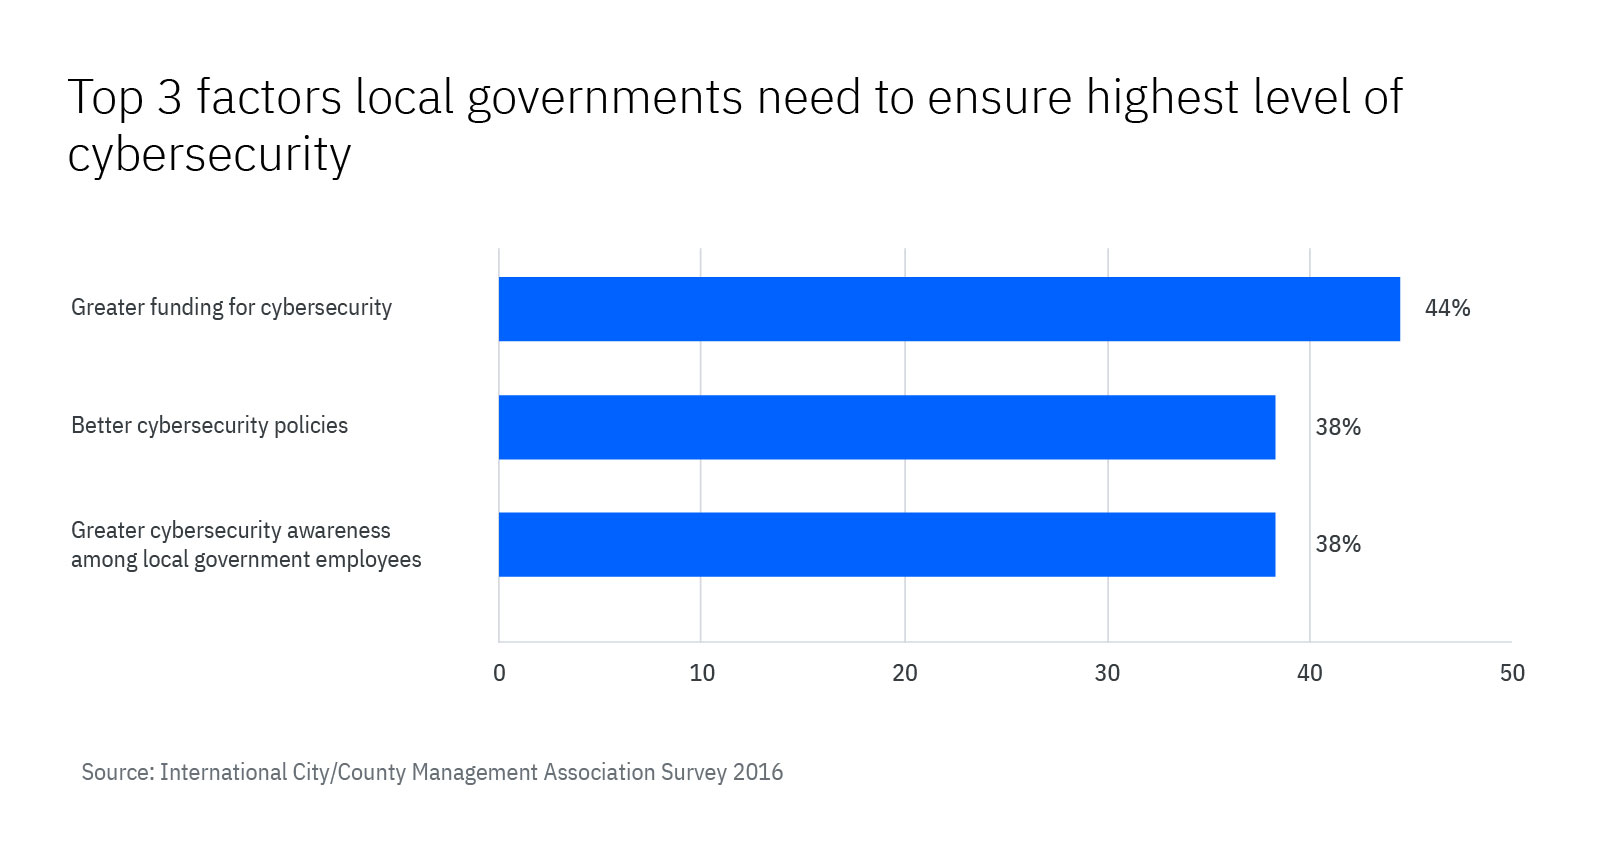 Chart from the International City/County Management Association Survey 2016